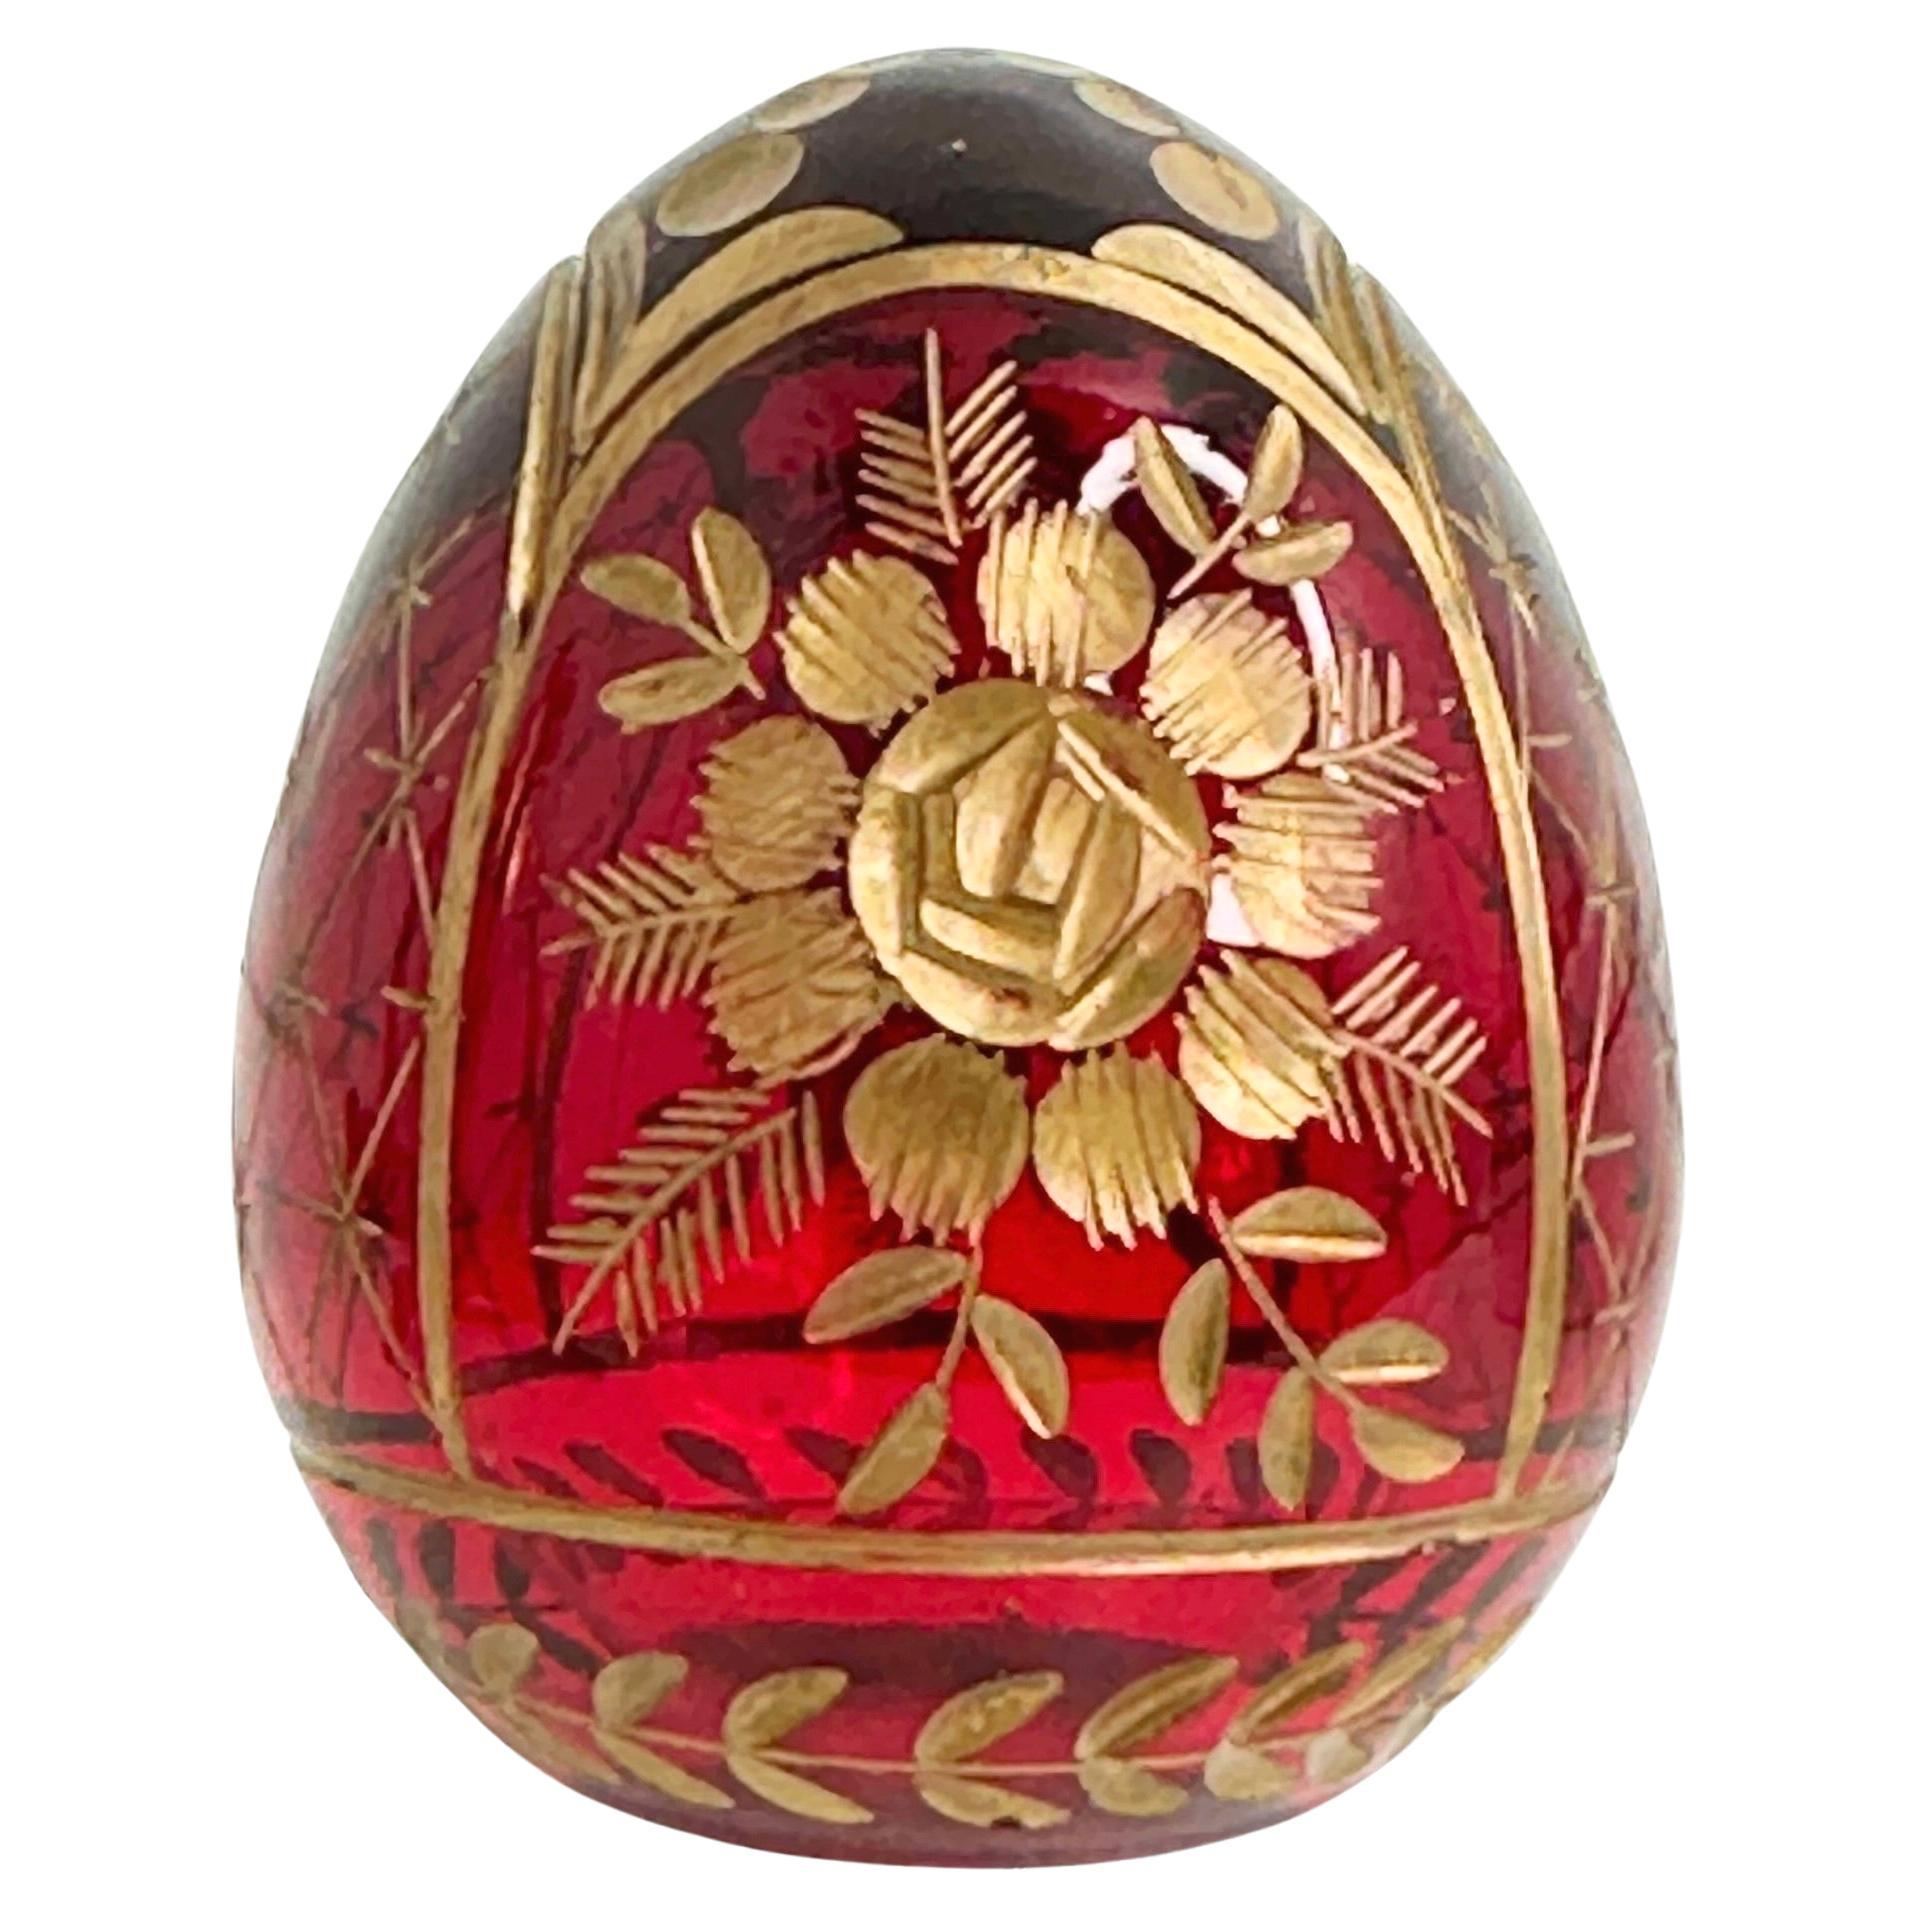 Vintage Faberge Russia Style Ruby Red Glass Egg with Etched Flower Garnishment